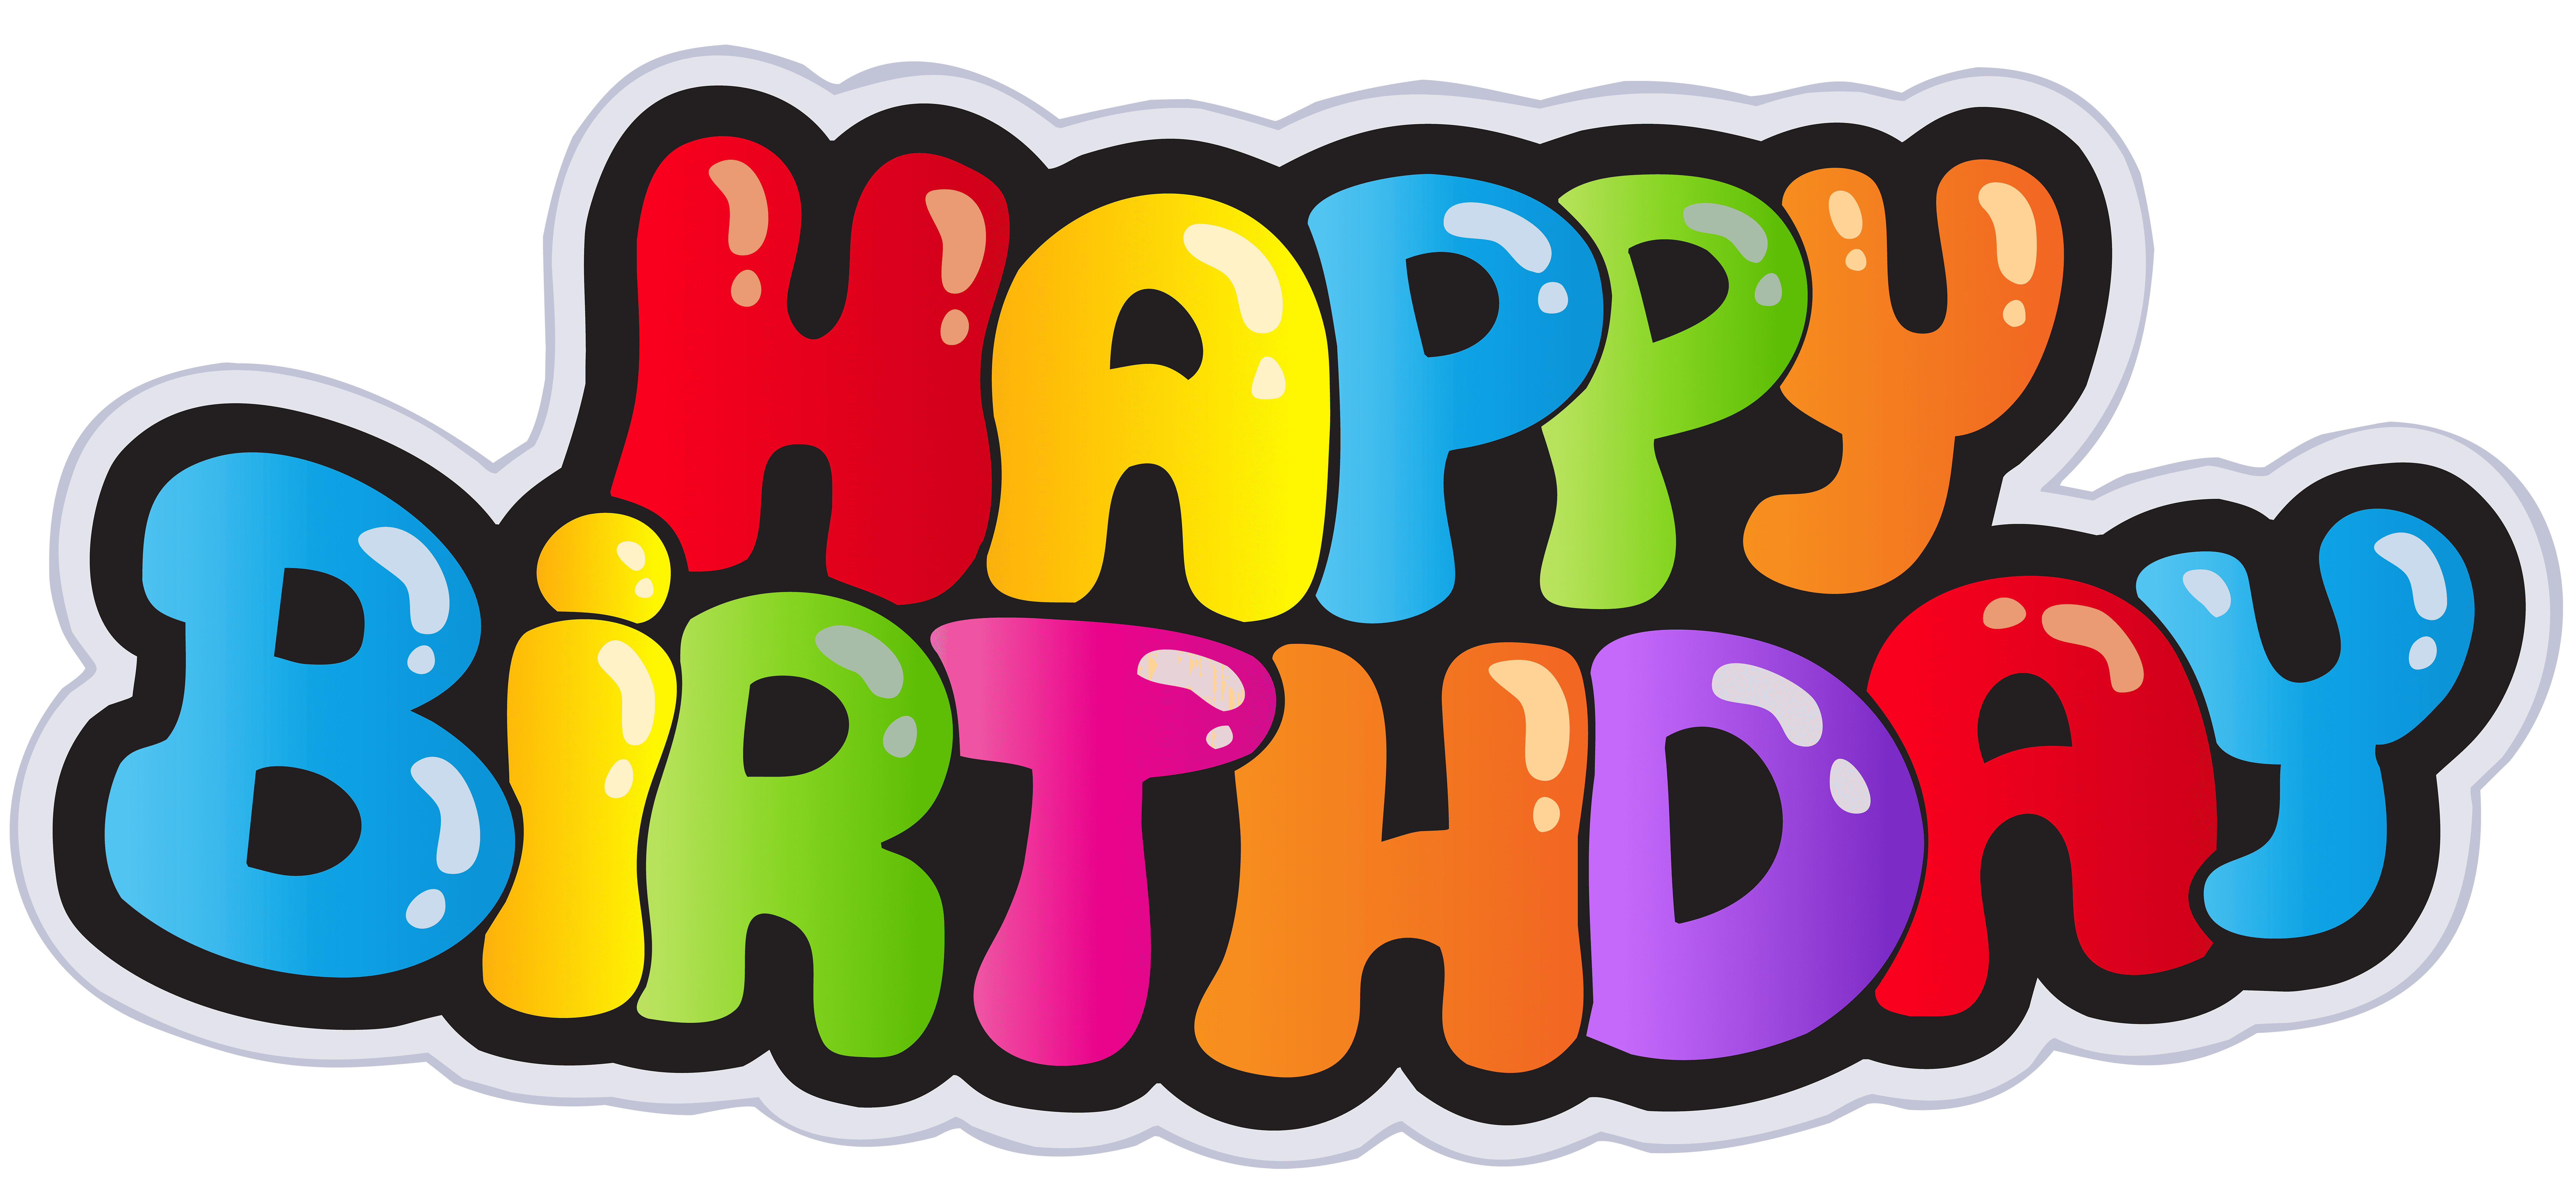 Happy Birthday 3d Text PNG FREE Vector Design Cdr, Ai, EPS, PNG, SVG ...